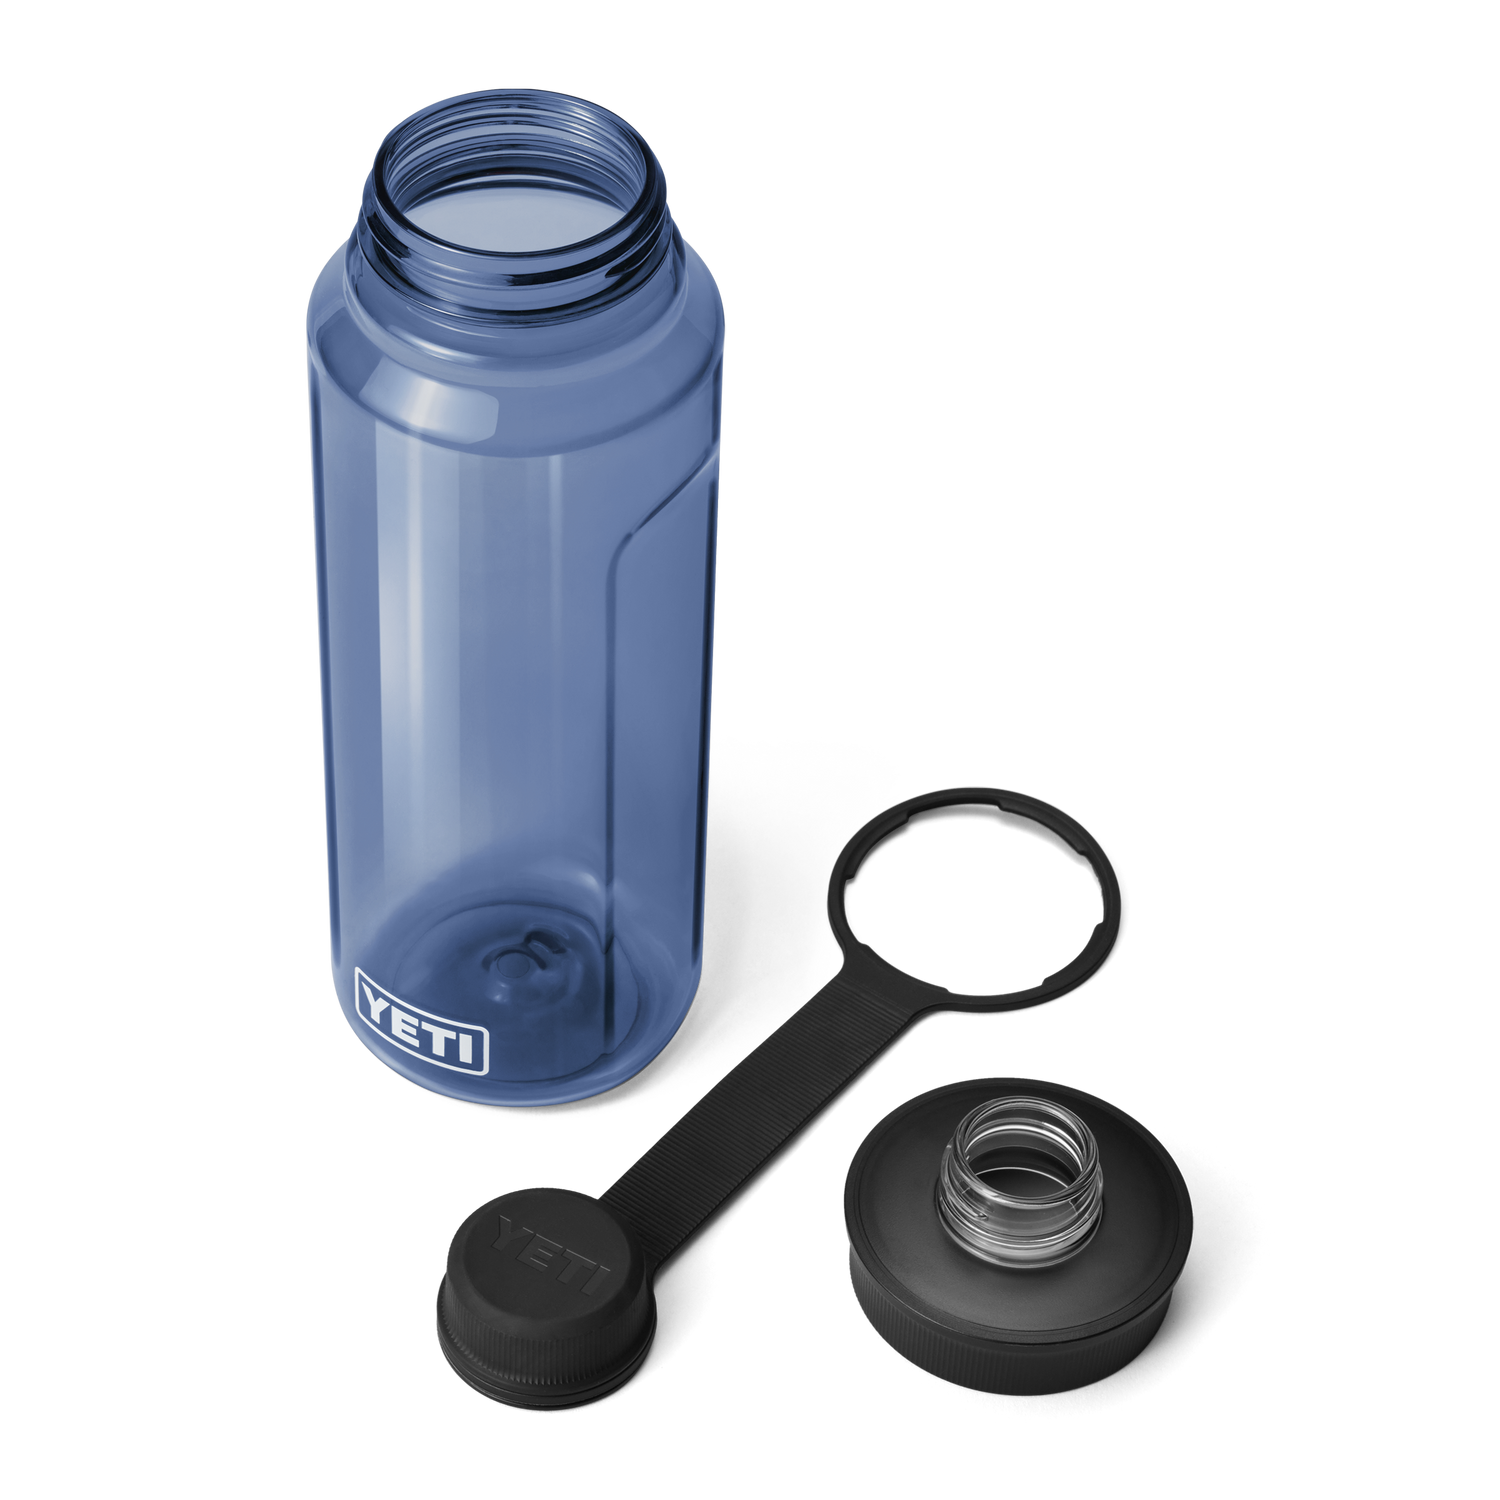 site_studio_Drinkware_Yonder_Tether_Accs_1L_Navy_3qtr_Chug_Lid_Off_0888_Primary_B_2400x2400.png